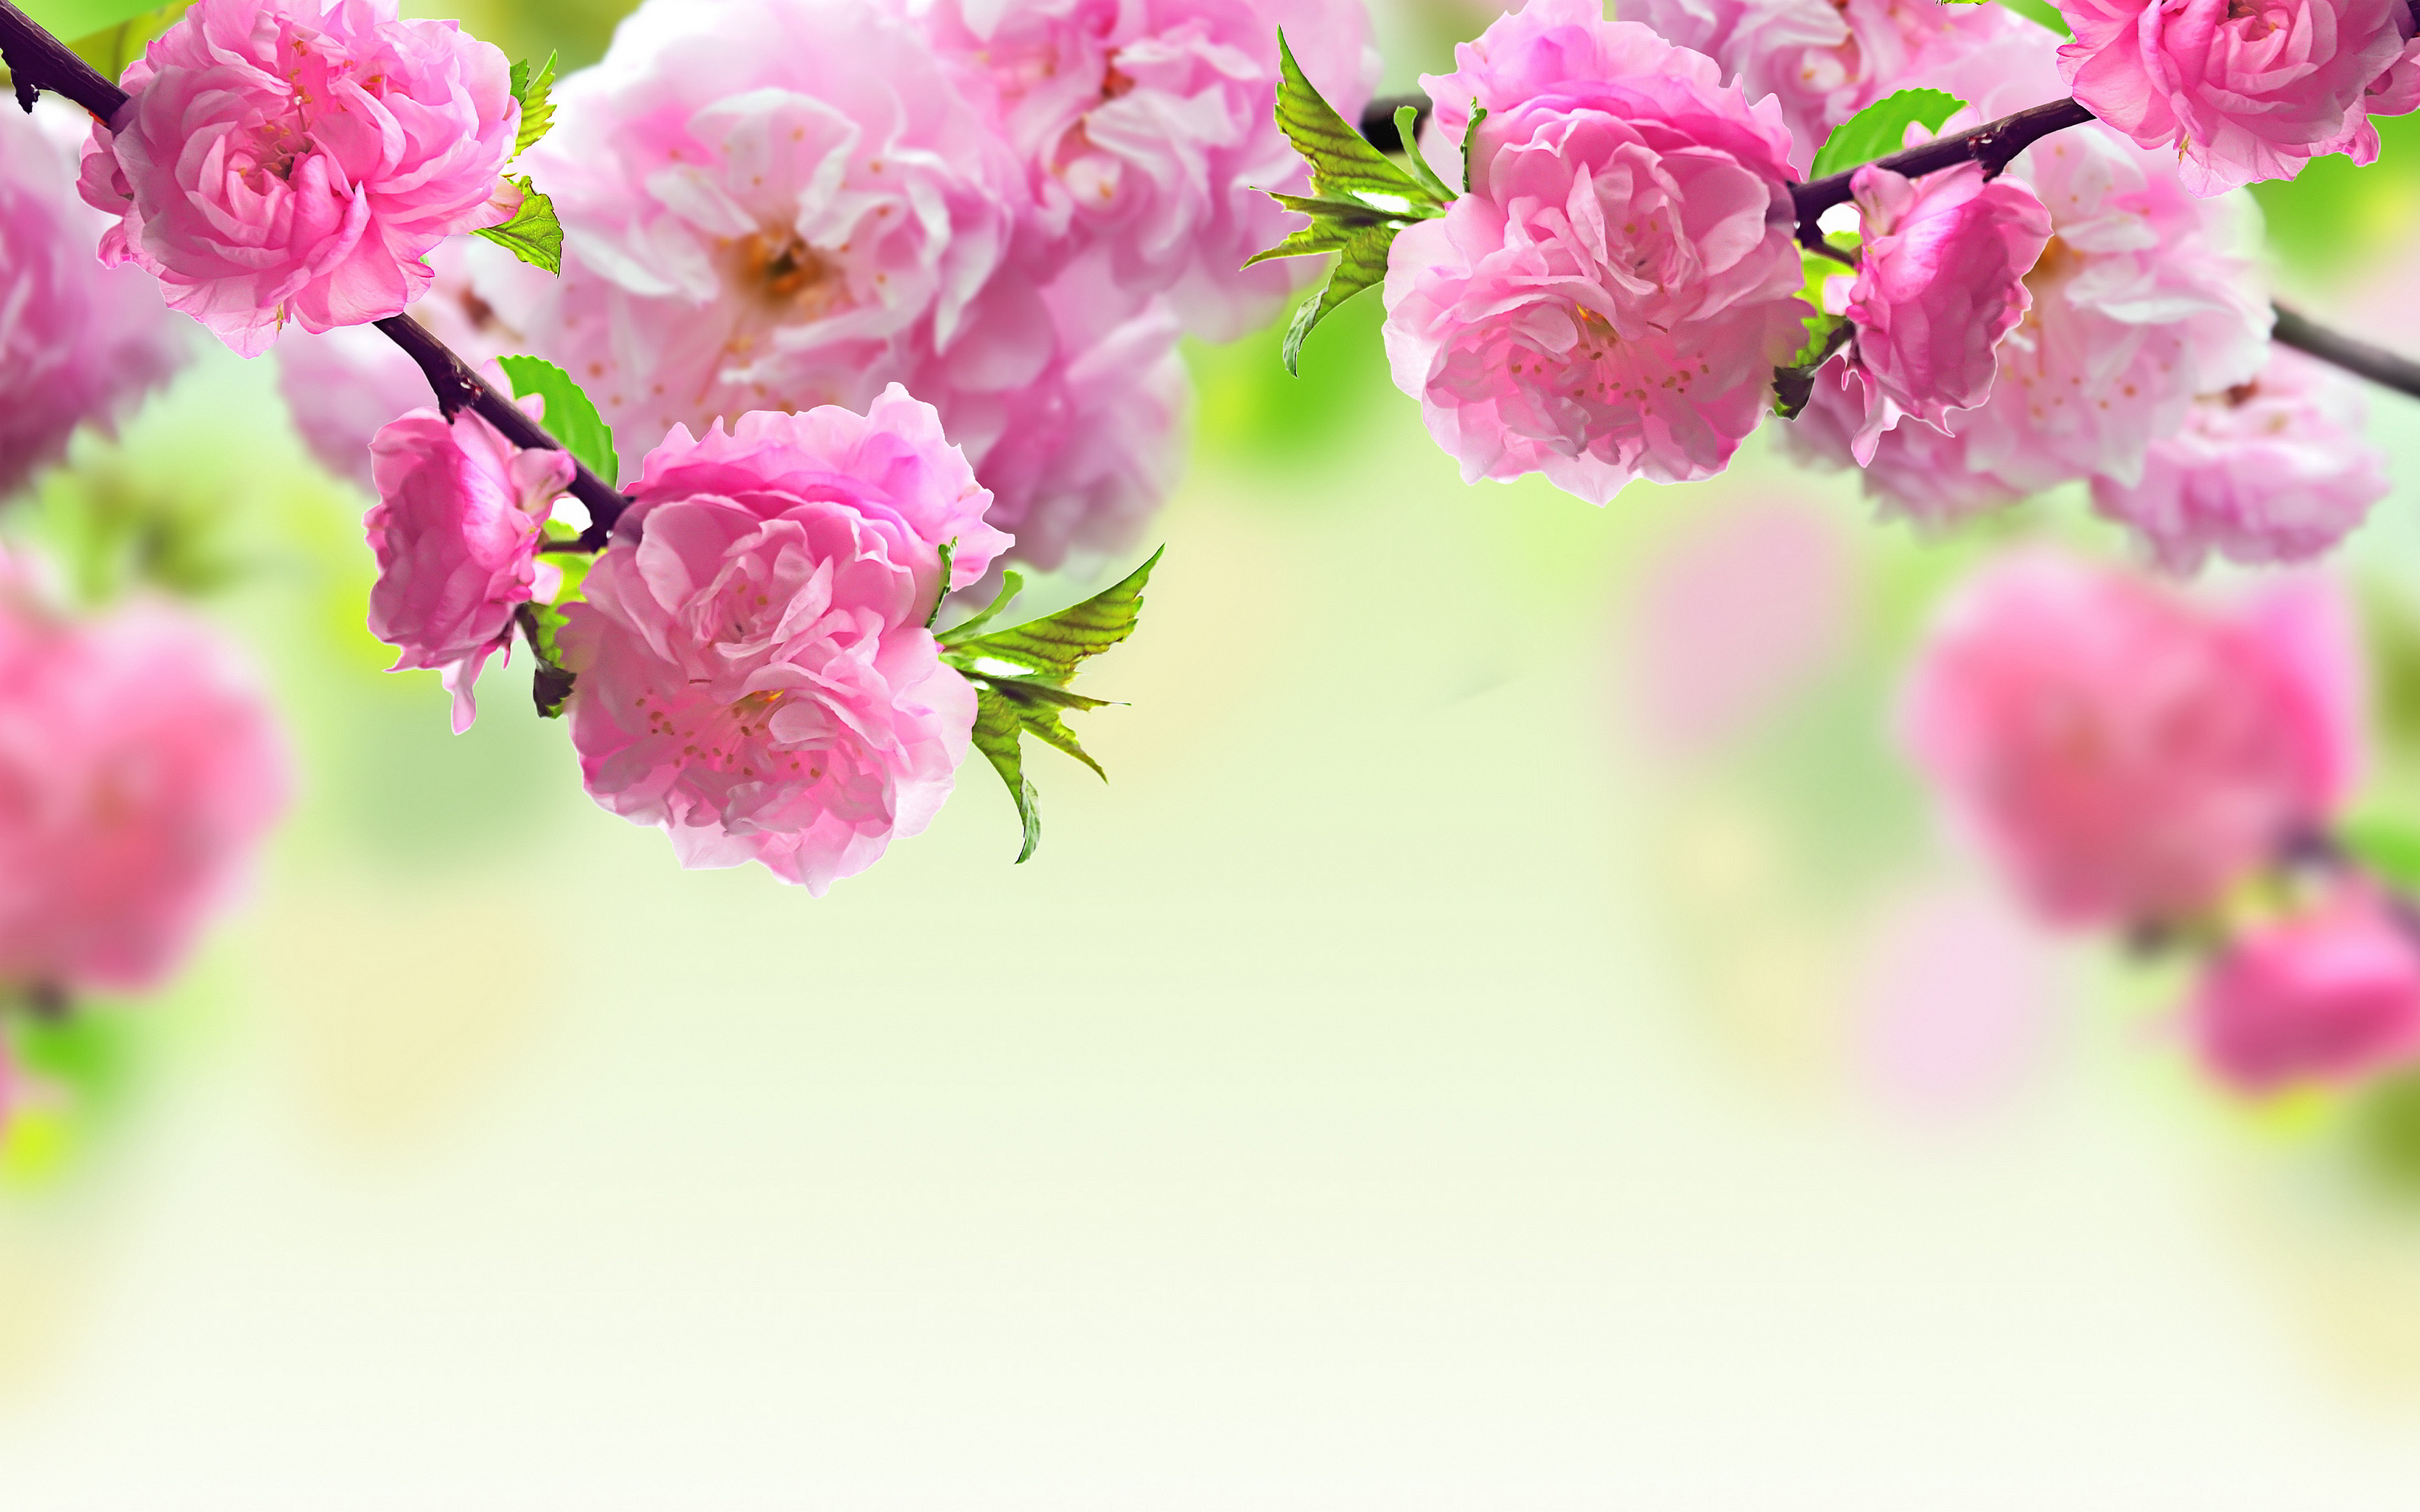 Image Of Spring Flowers And Wallpaper